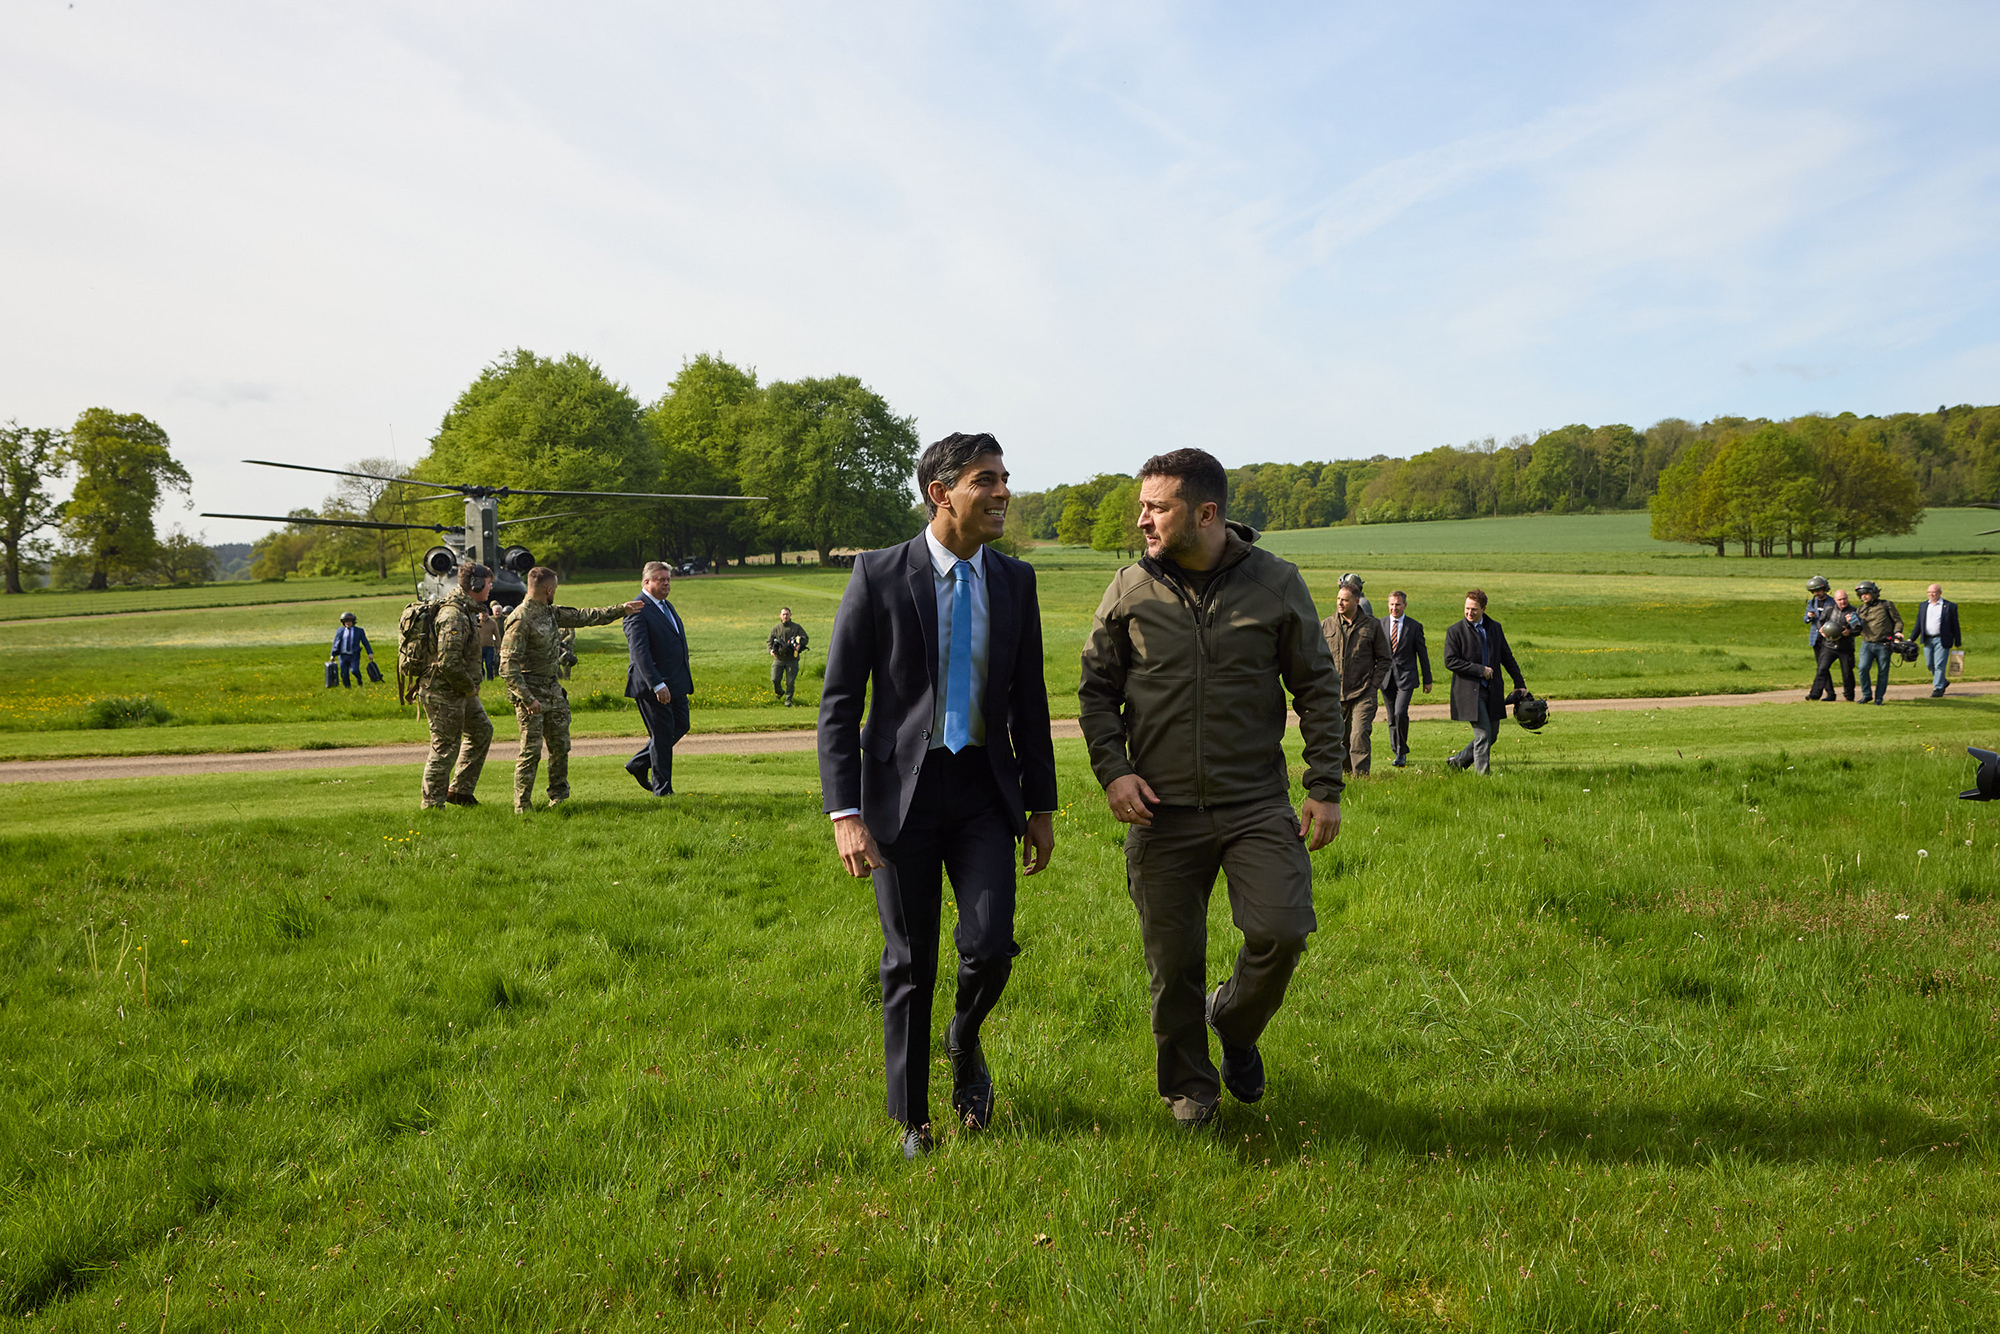 British Prime Minister Rishi Sunak, center left, welcomes Ukrainian President Volodymyr Zelensky at Chequers, the prime minister's official country residence in Aylesbury, England, on May 15.